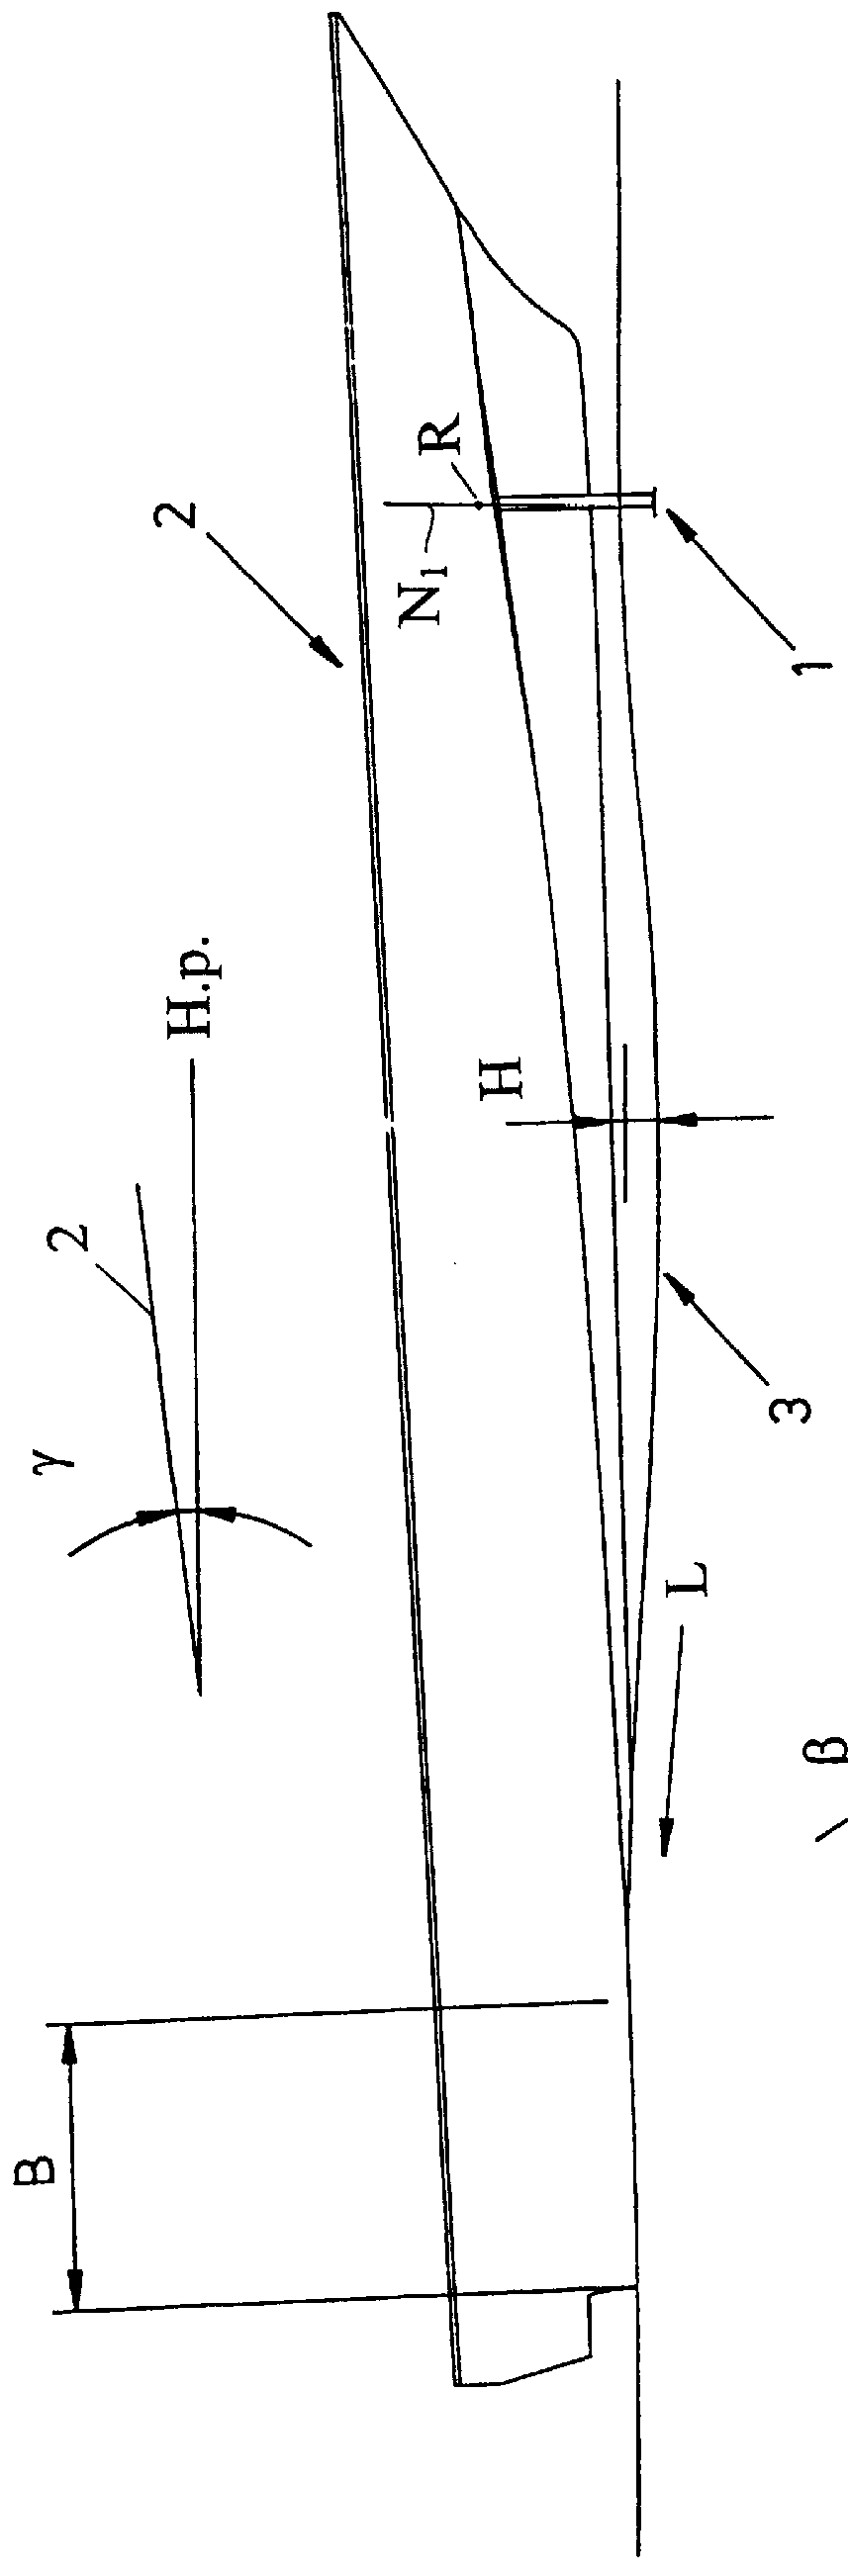 Method and mechanism for dynamic trim of a fast moving, planning or semi-planning ship hull